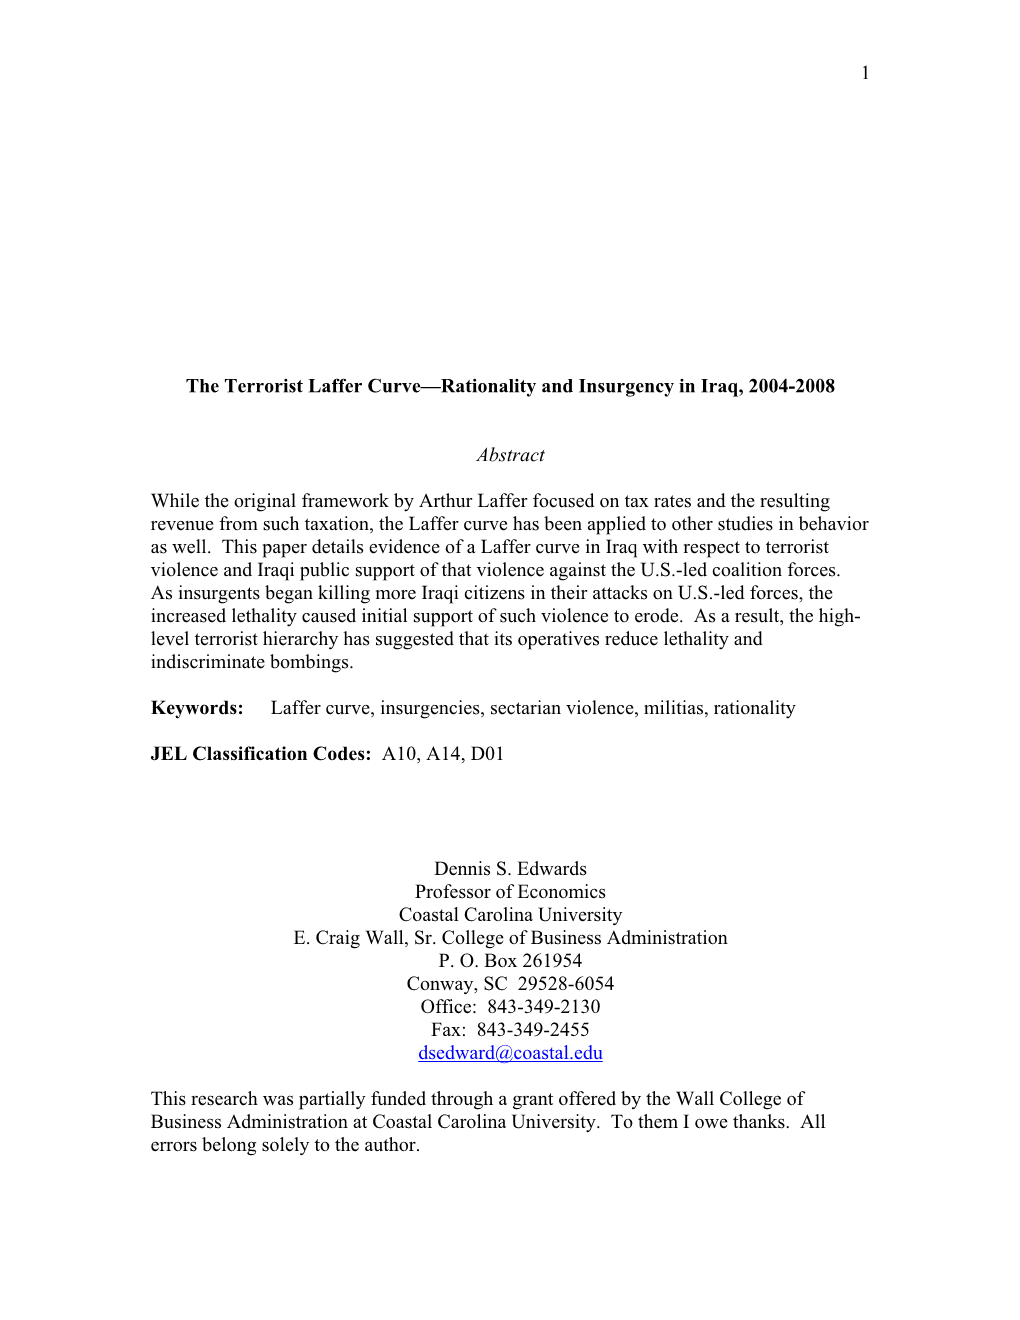 1 the Terrorist Laffer Curve—Rationality and Insurgency in Iraq